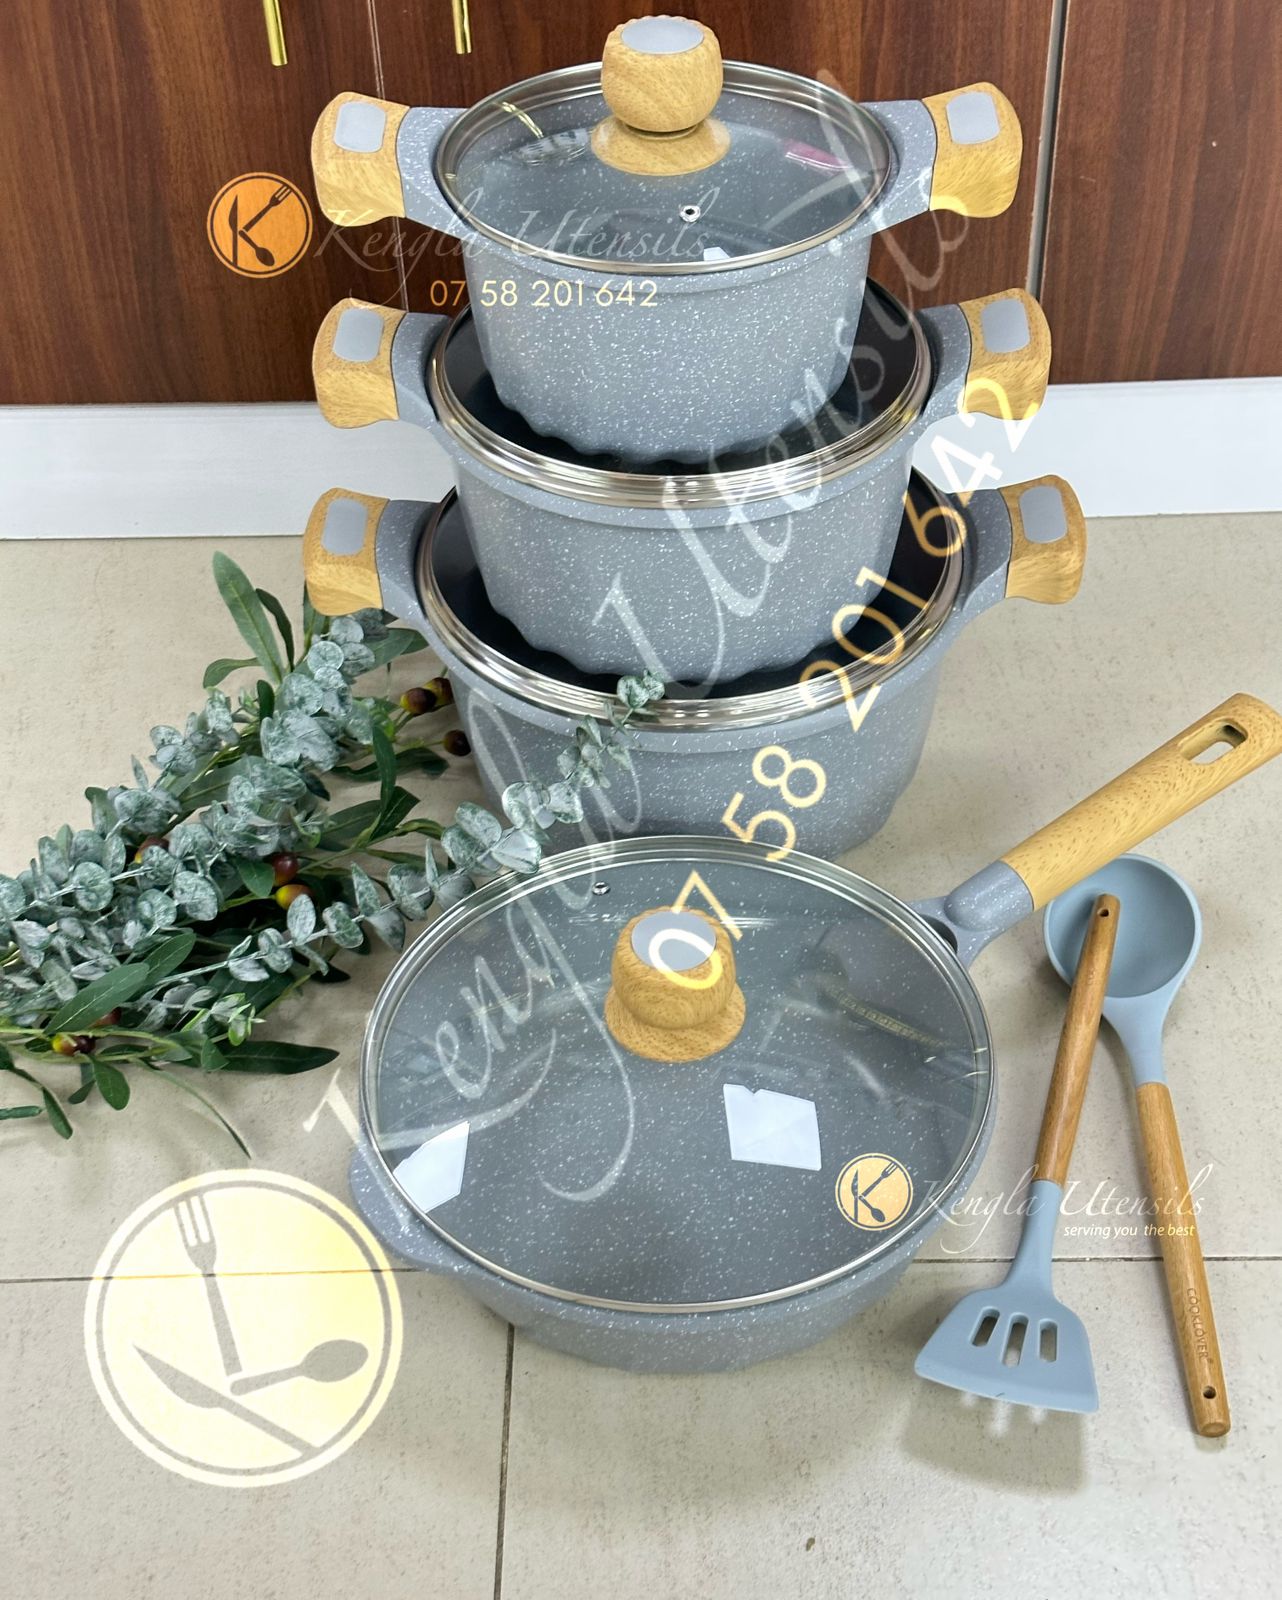 ⚜️10pcs cooklover Granite cookware set 💧Heavy duty and good